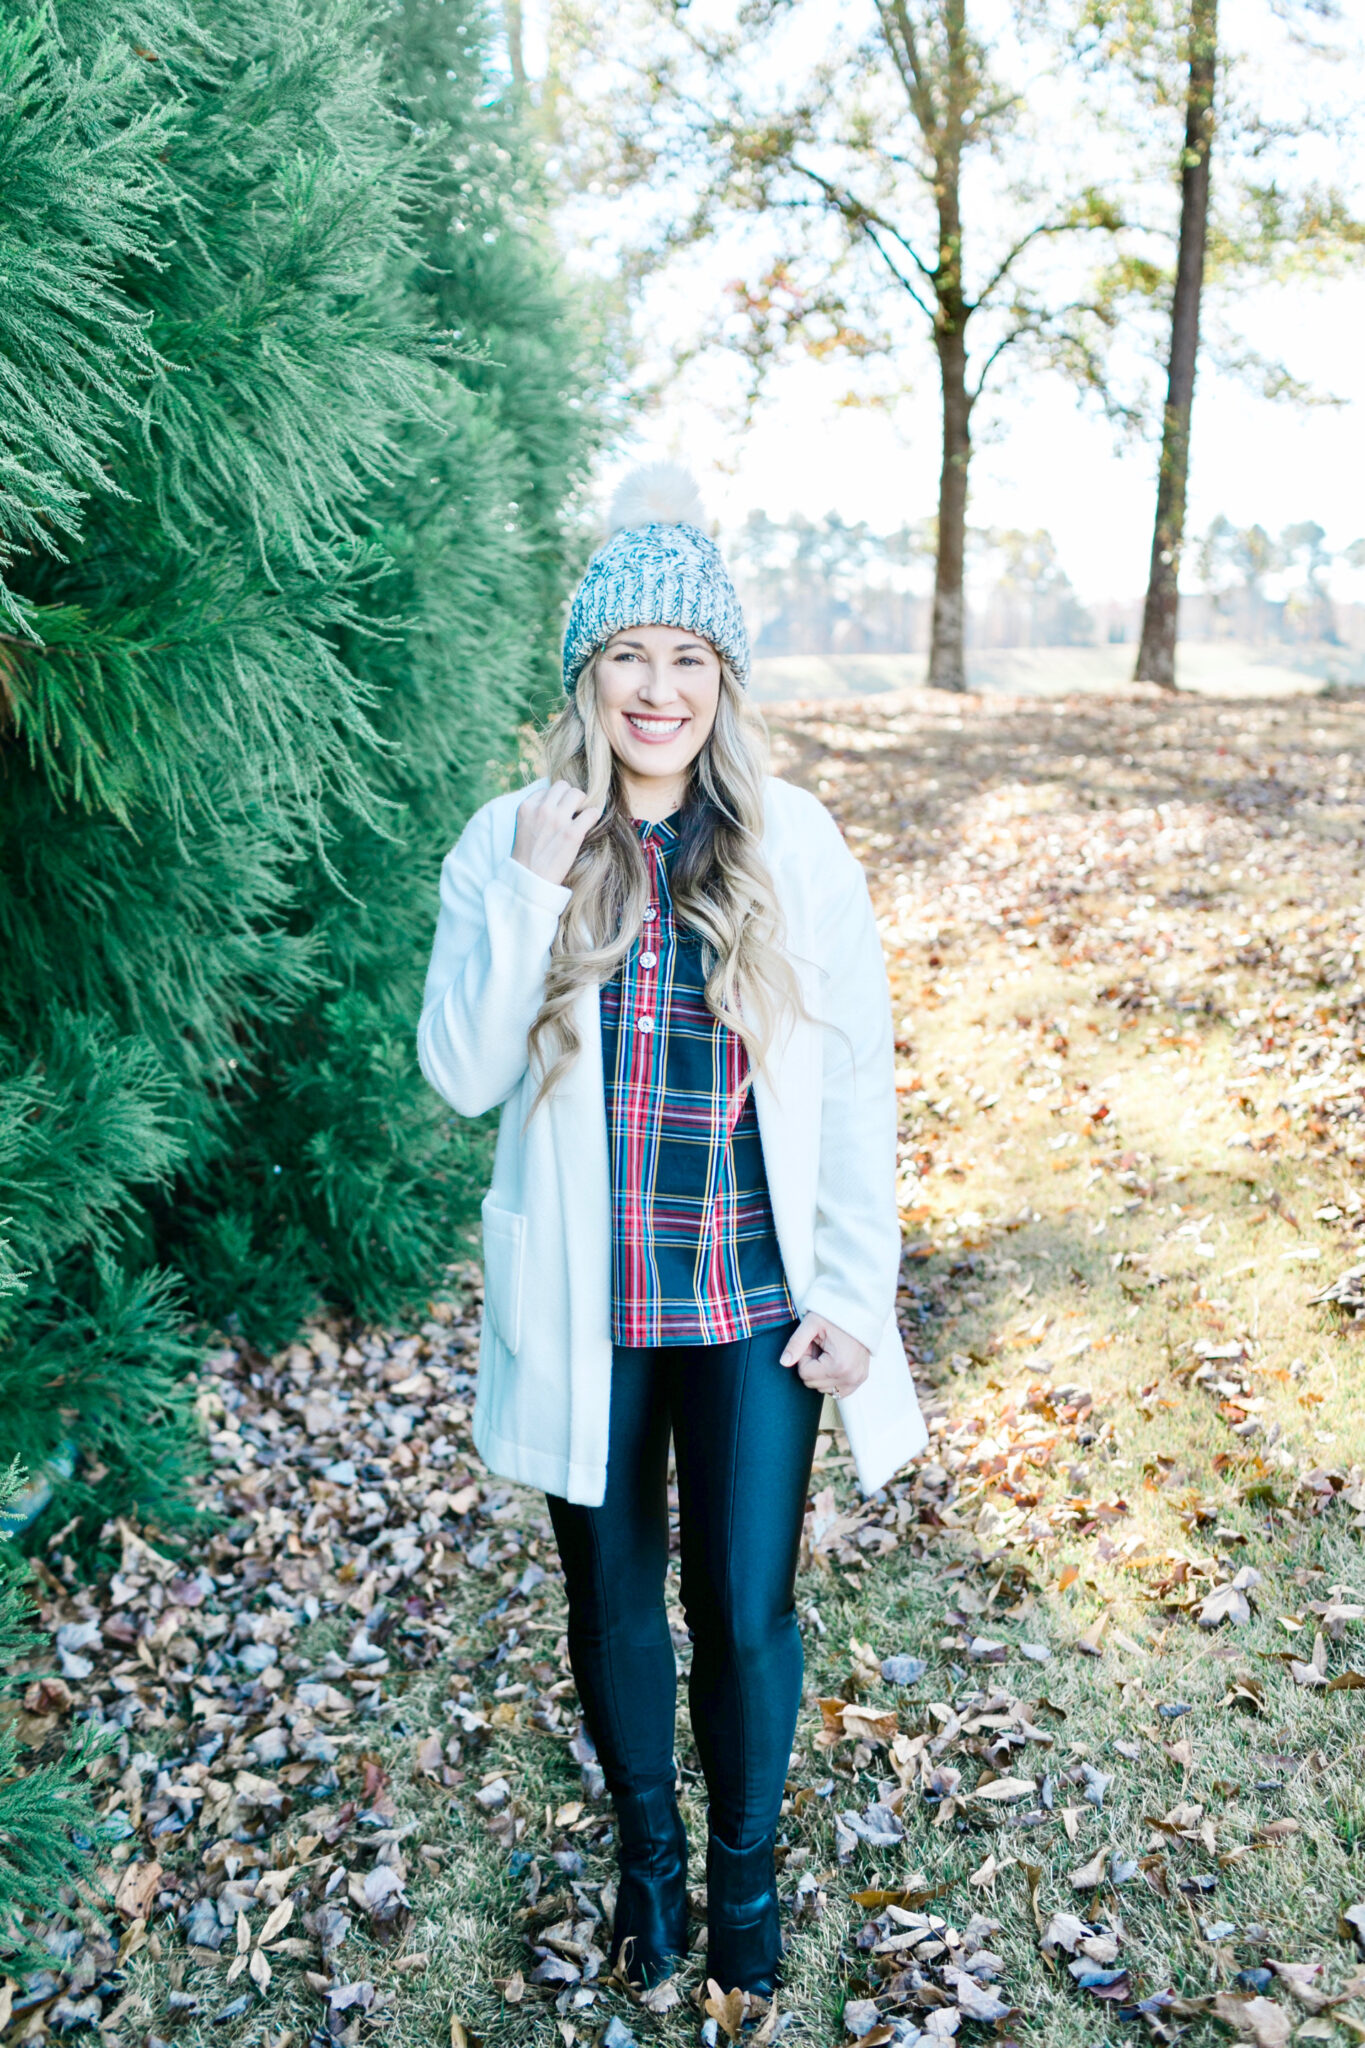 J.Crew Factory Tartan Plaid Top styled by top US mom fashion blogger, Walking in Memphis in High Heels.